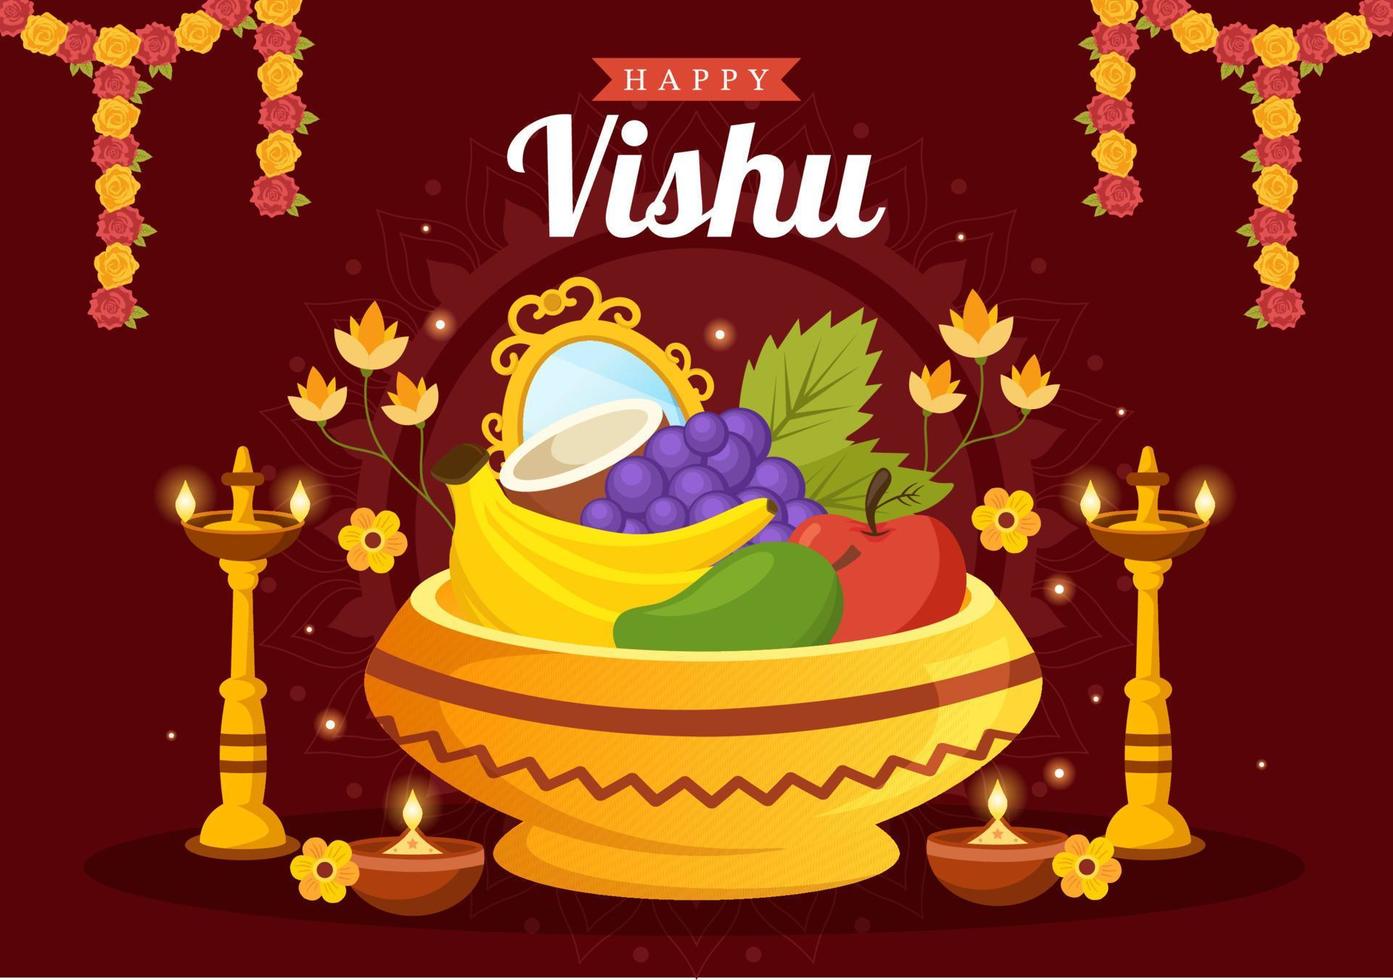 Happy Vishu Festival Illustration with Traditional Kerala Kani, Fruits and Vegetables for Landing Page in Flat Cartoon Hand Drawn Templates vector